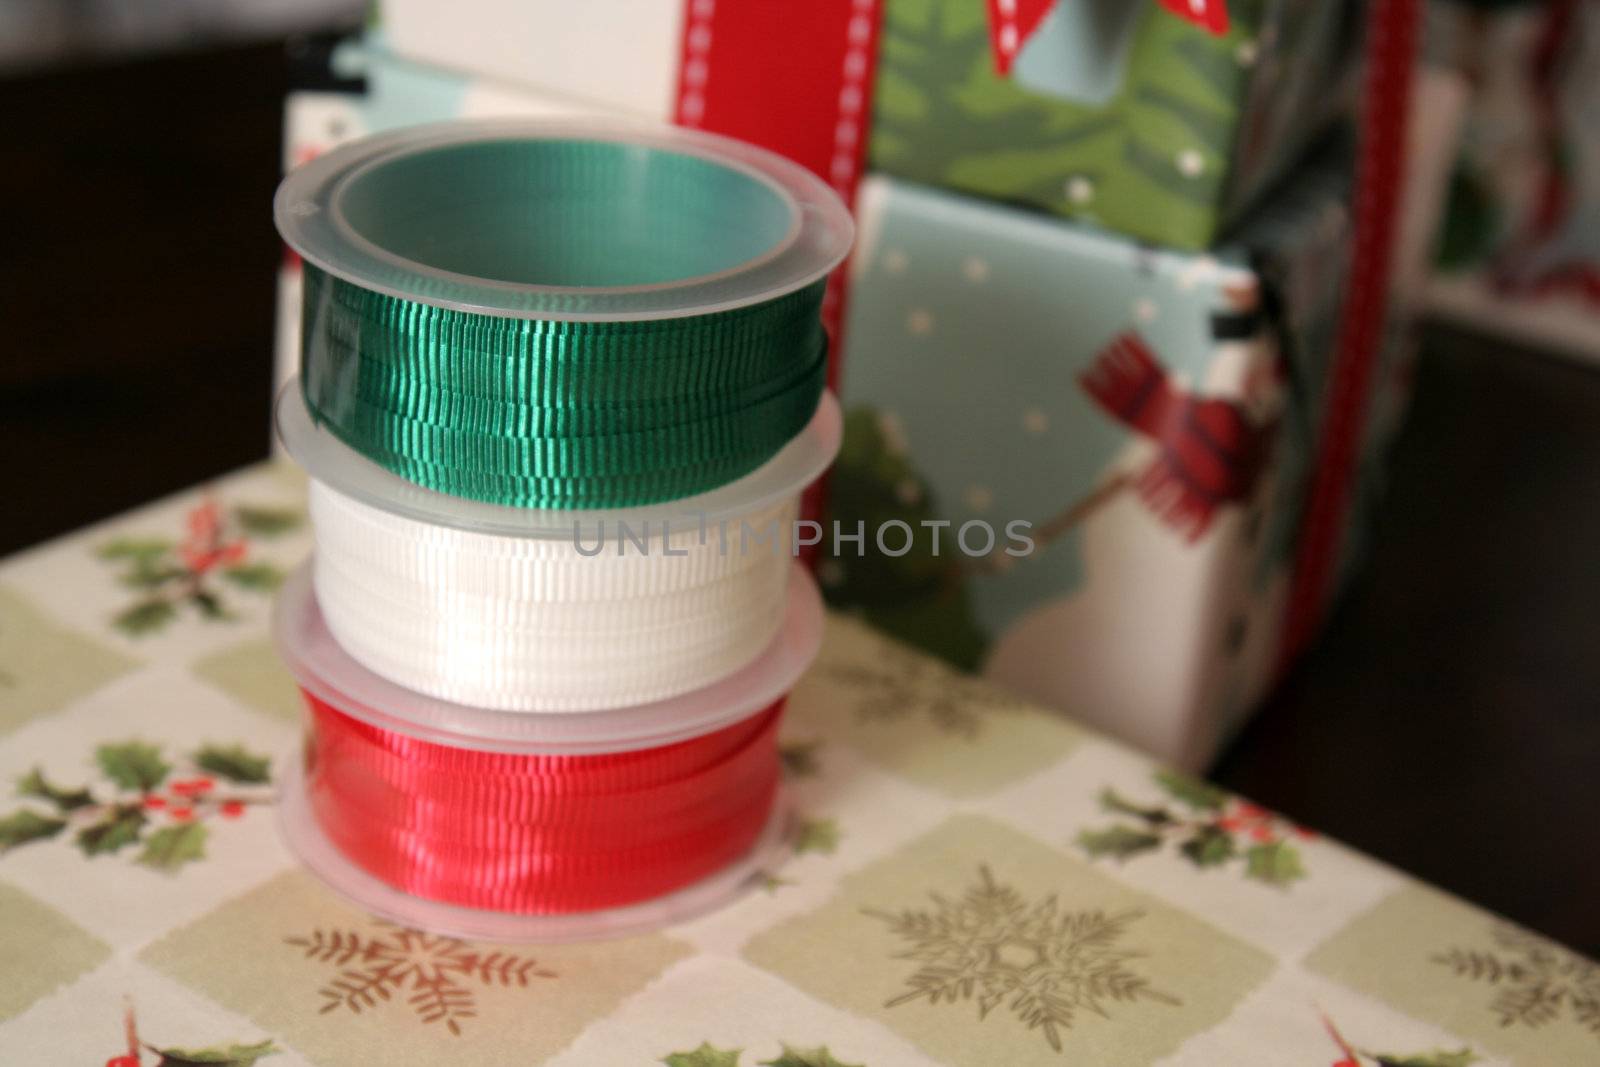 Three spools of Christmas gift wrapping ribbon sitting on already wrapped gifts.
